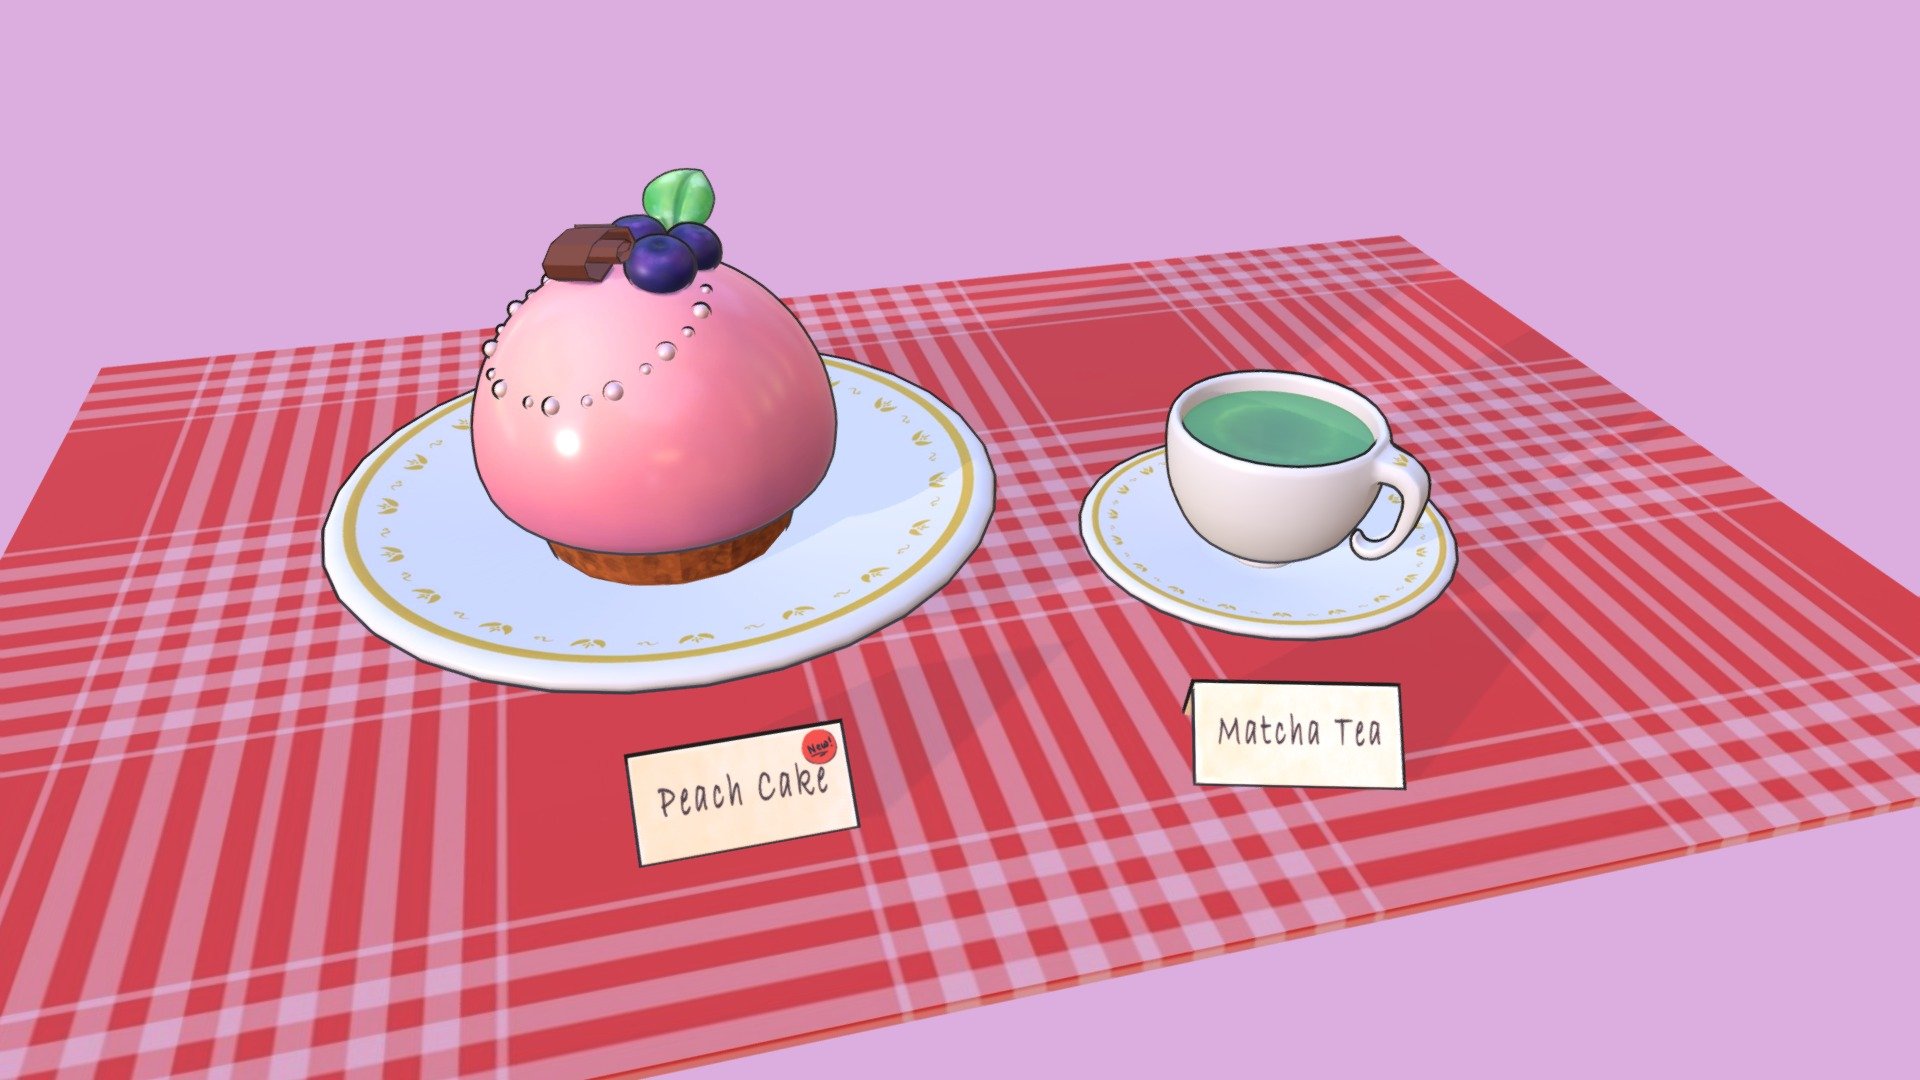 The inspiration comes from a cake I saw in a French dessert shop. I really love the pinkness, so I wanted to make a pink cake. The set is modeled in Maya, and rendered in Mari. Some textures such as the biscuit at the bottom of the cake and the plate patterns are made in Photoshop. To add the toon lines, I followed this tutorial: https://blog.sketchfab.com/creating-a-cartoon-outline-for-sketchfab/
Hope the cake is tasty! - Cake and Tea (toon) - 3D model by radiuswon 3d model